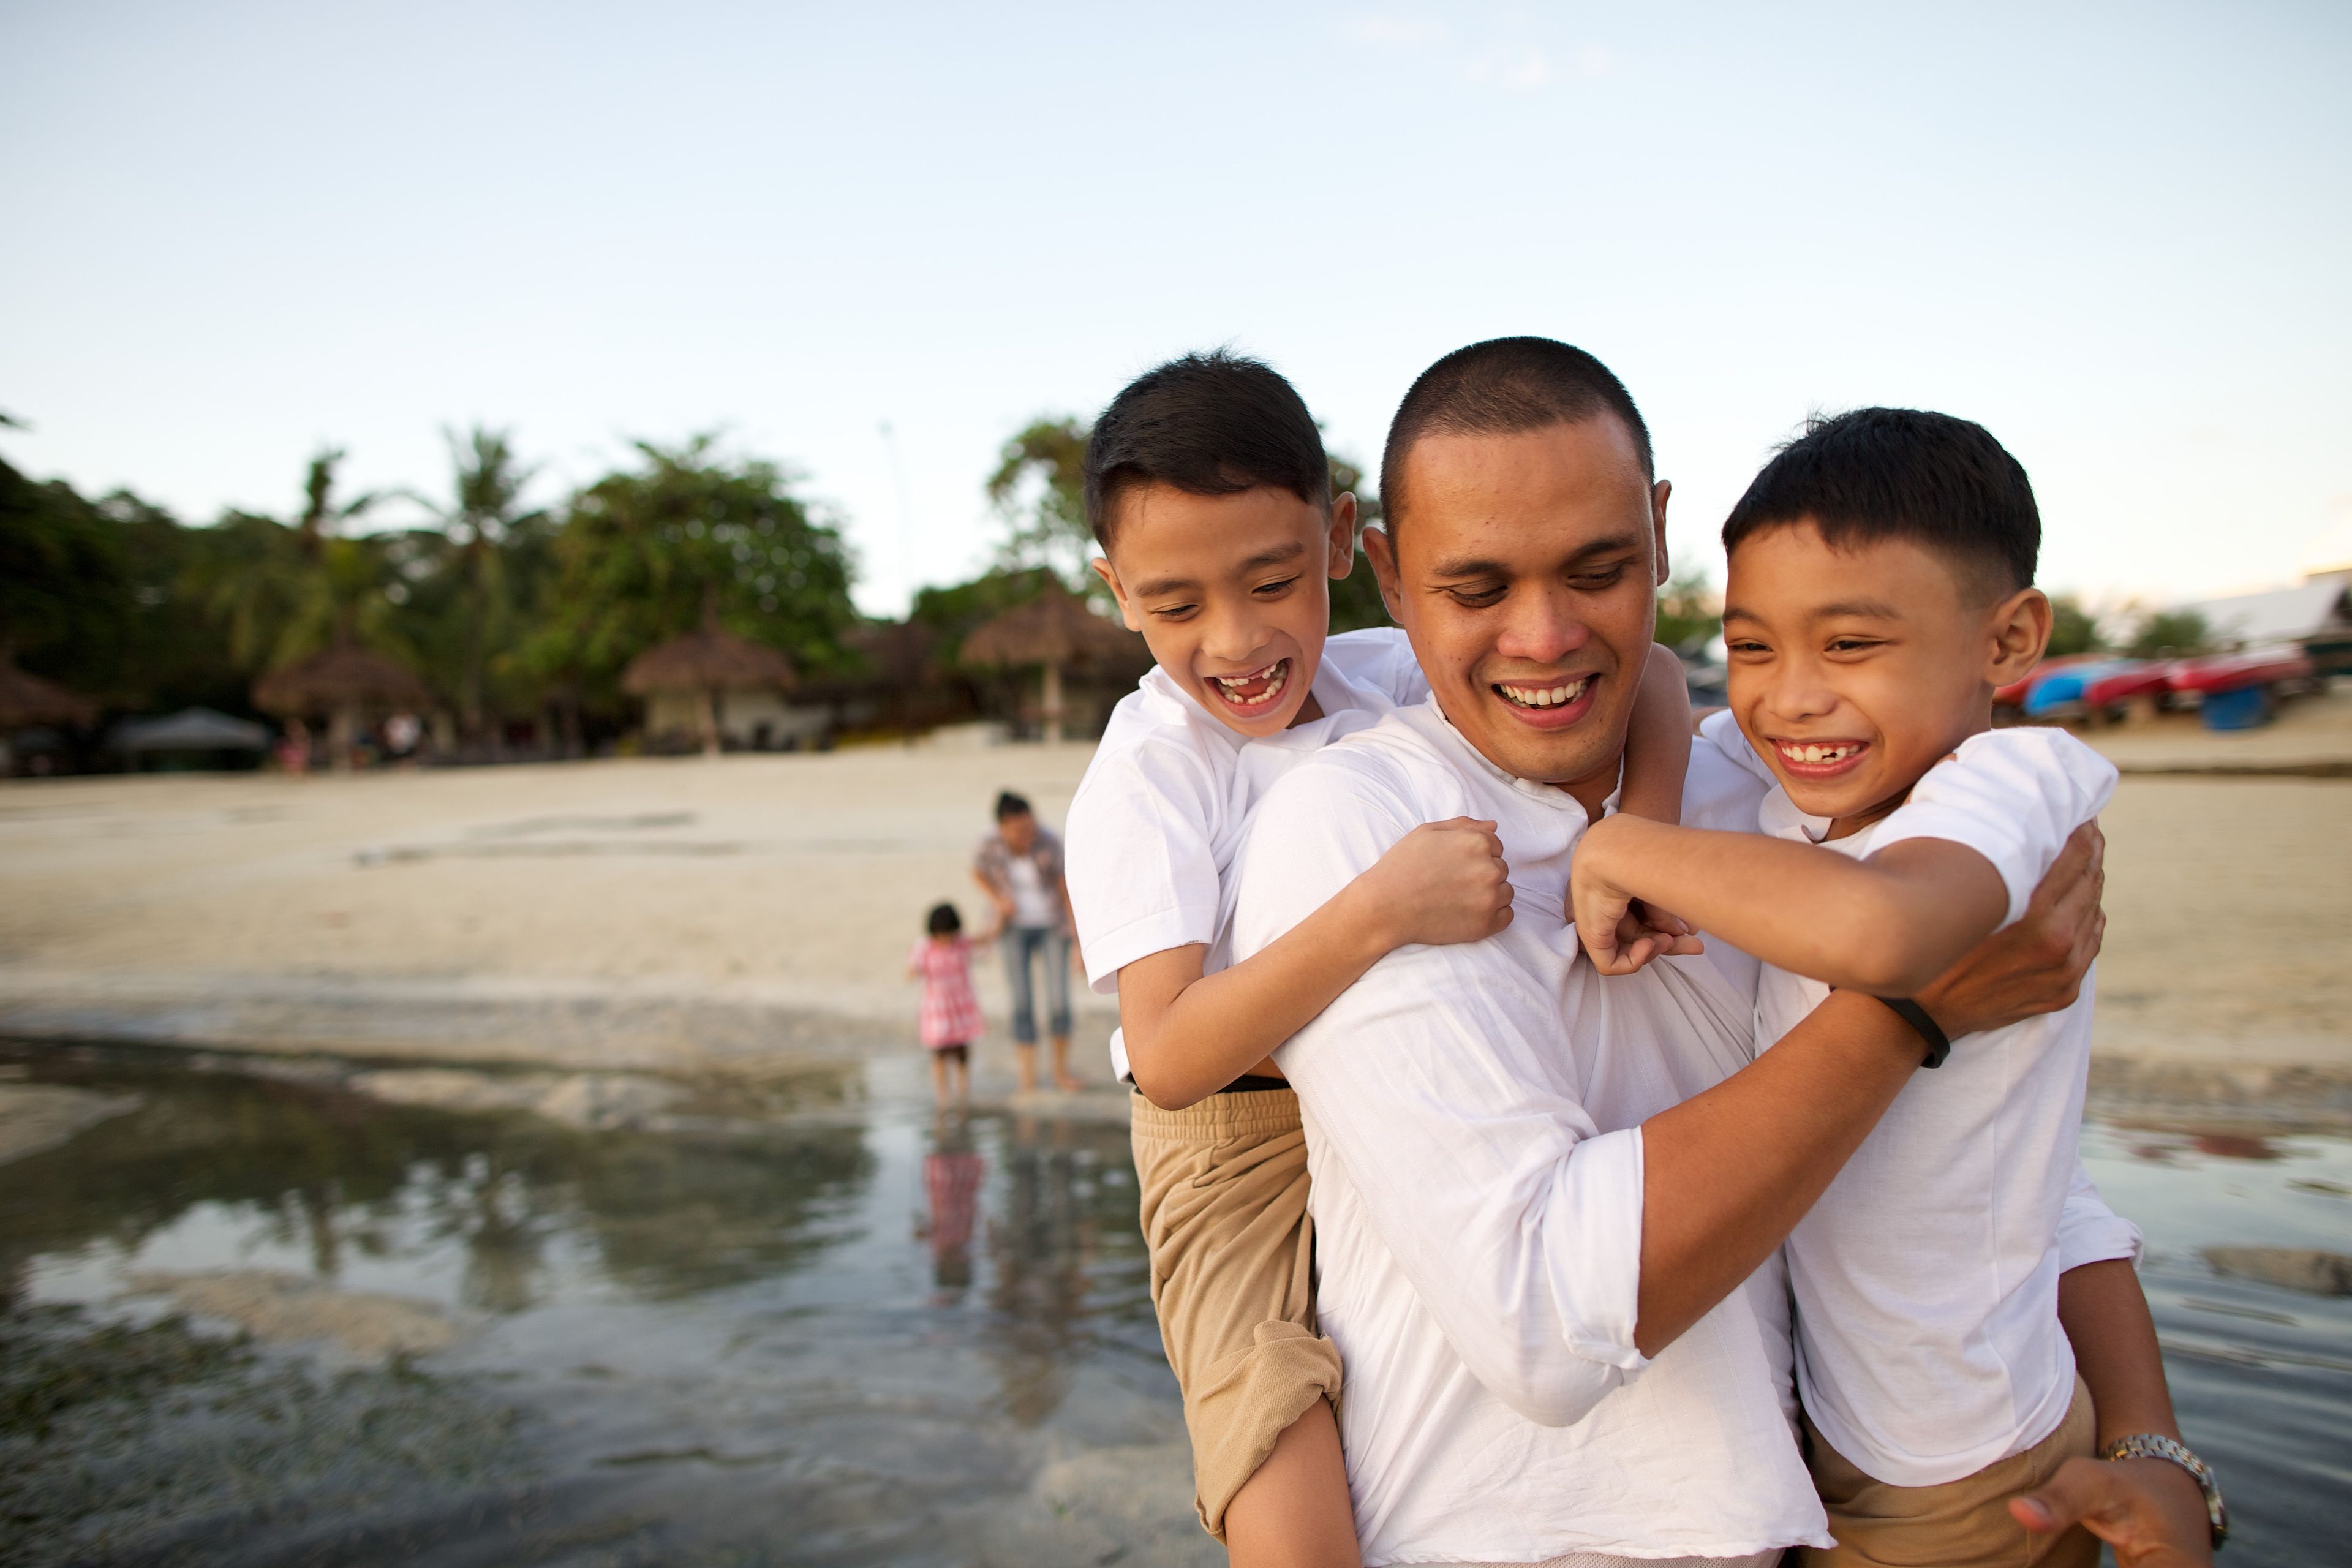 A father and his two sons run into the water at the beach.